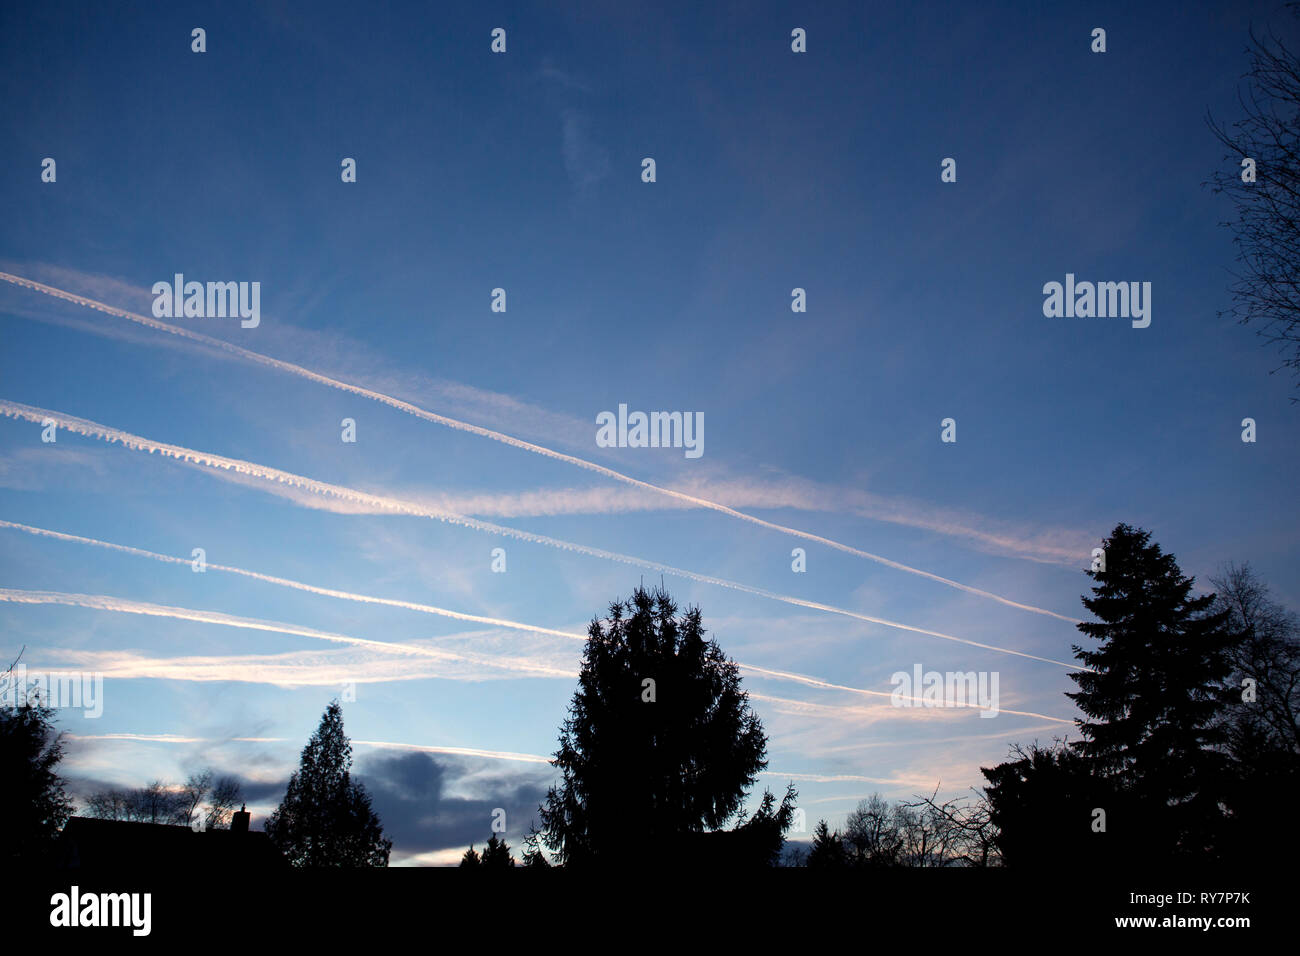 Several contrails left in clear blue sky by aircraft Stock Photo